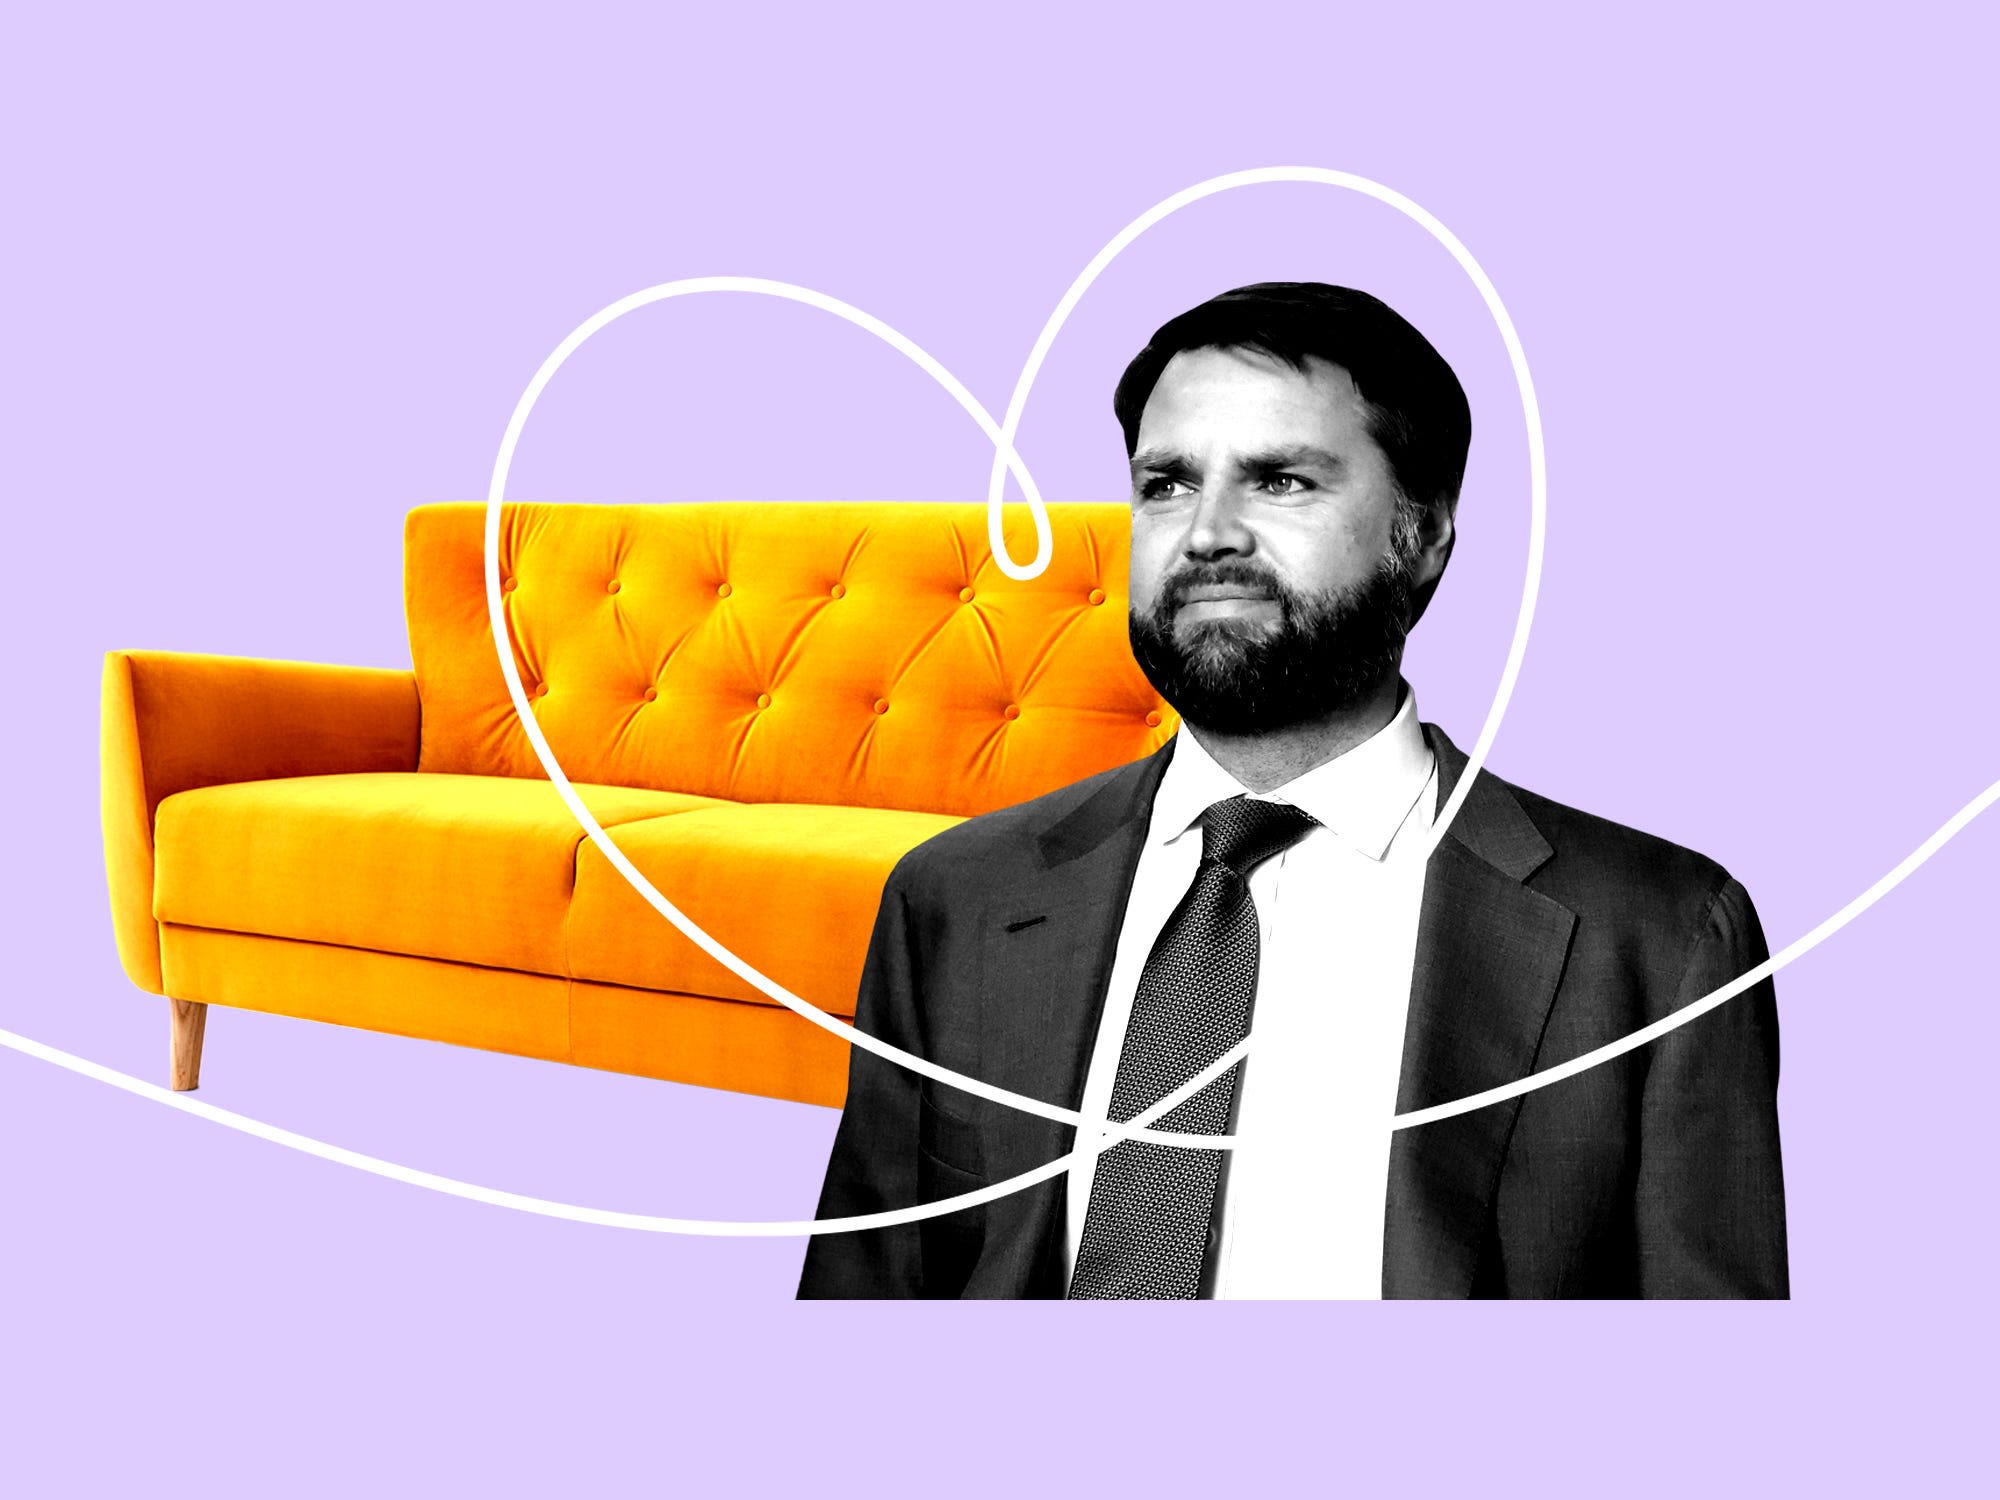 The author of the viral joke post about JD Vance having sex with a couch breaks his silence